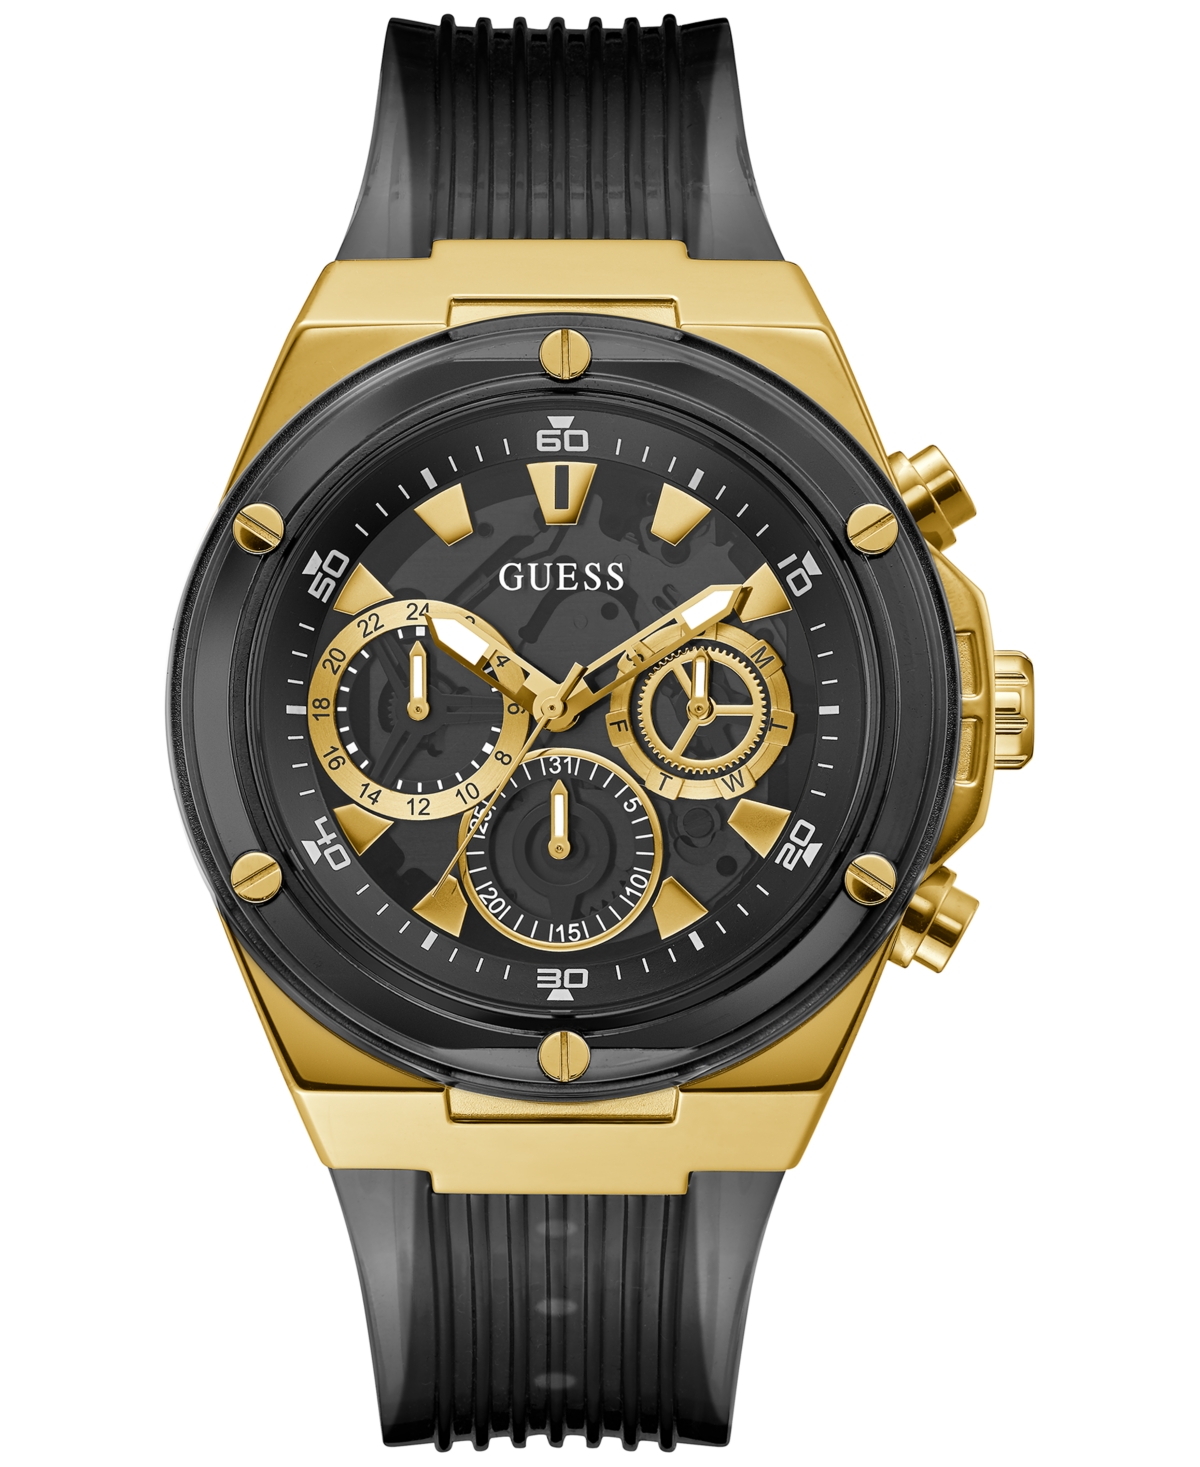 Guess Men's Textured Black Silicone Strap Watch, 46mm